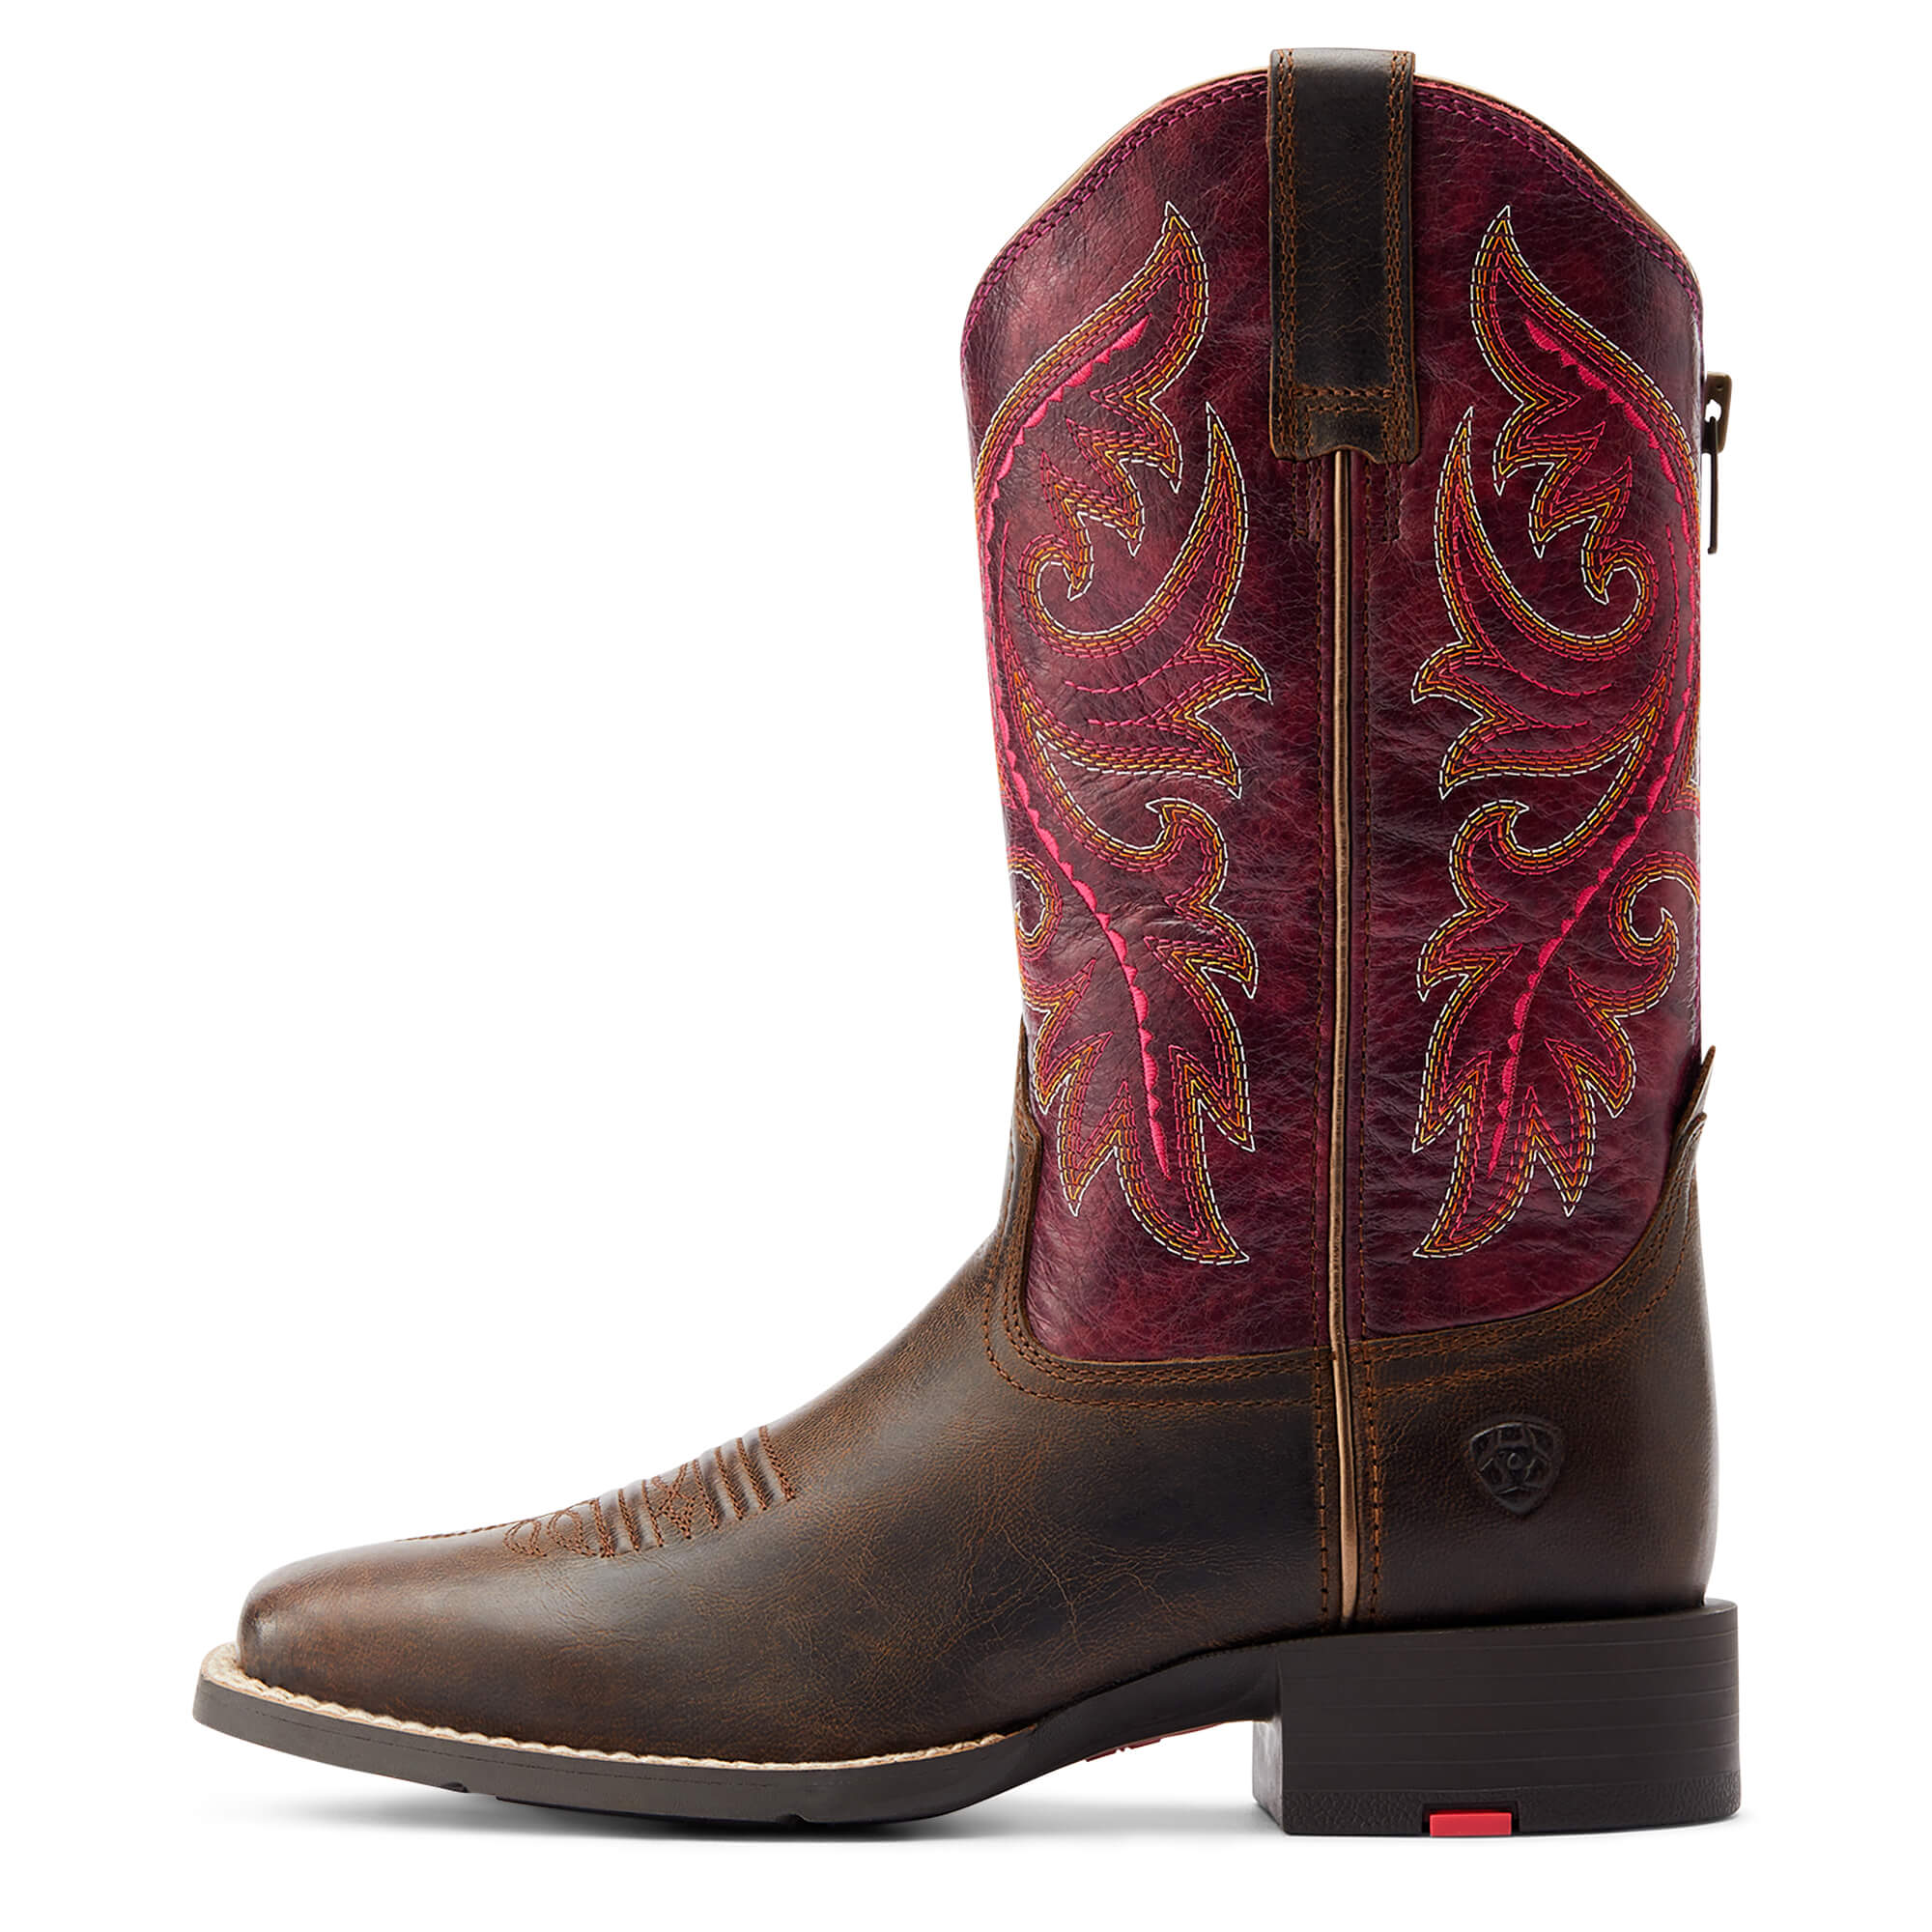 Ariat_Round_Up_Back_Zip_Western_Boot_10044433_side